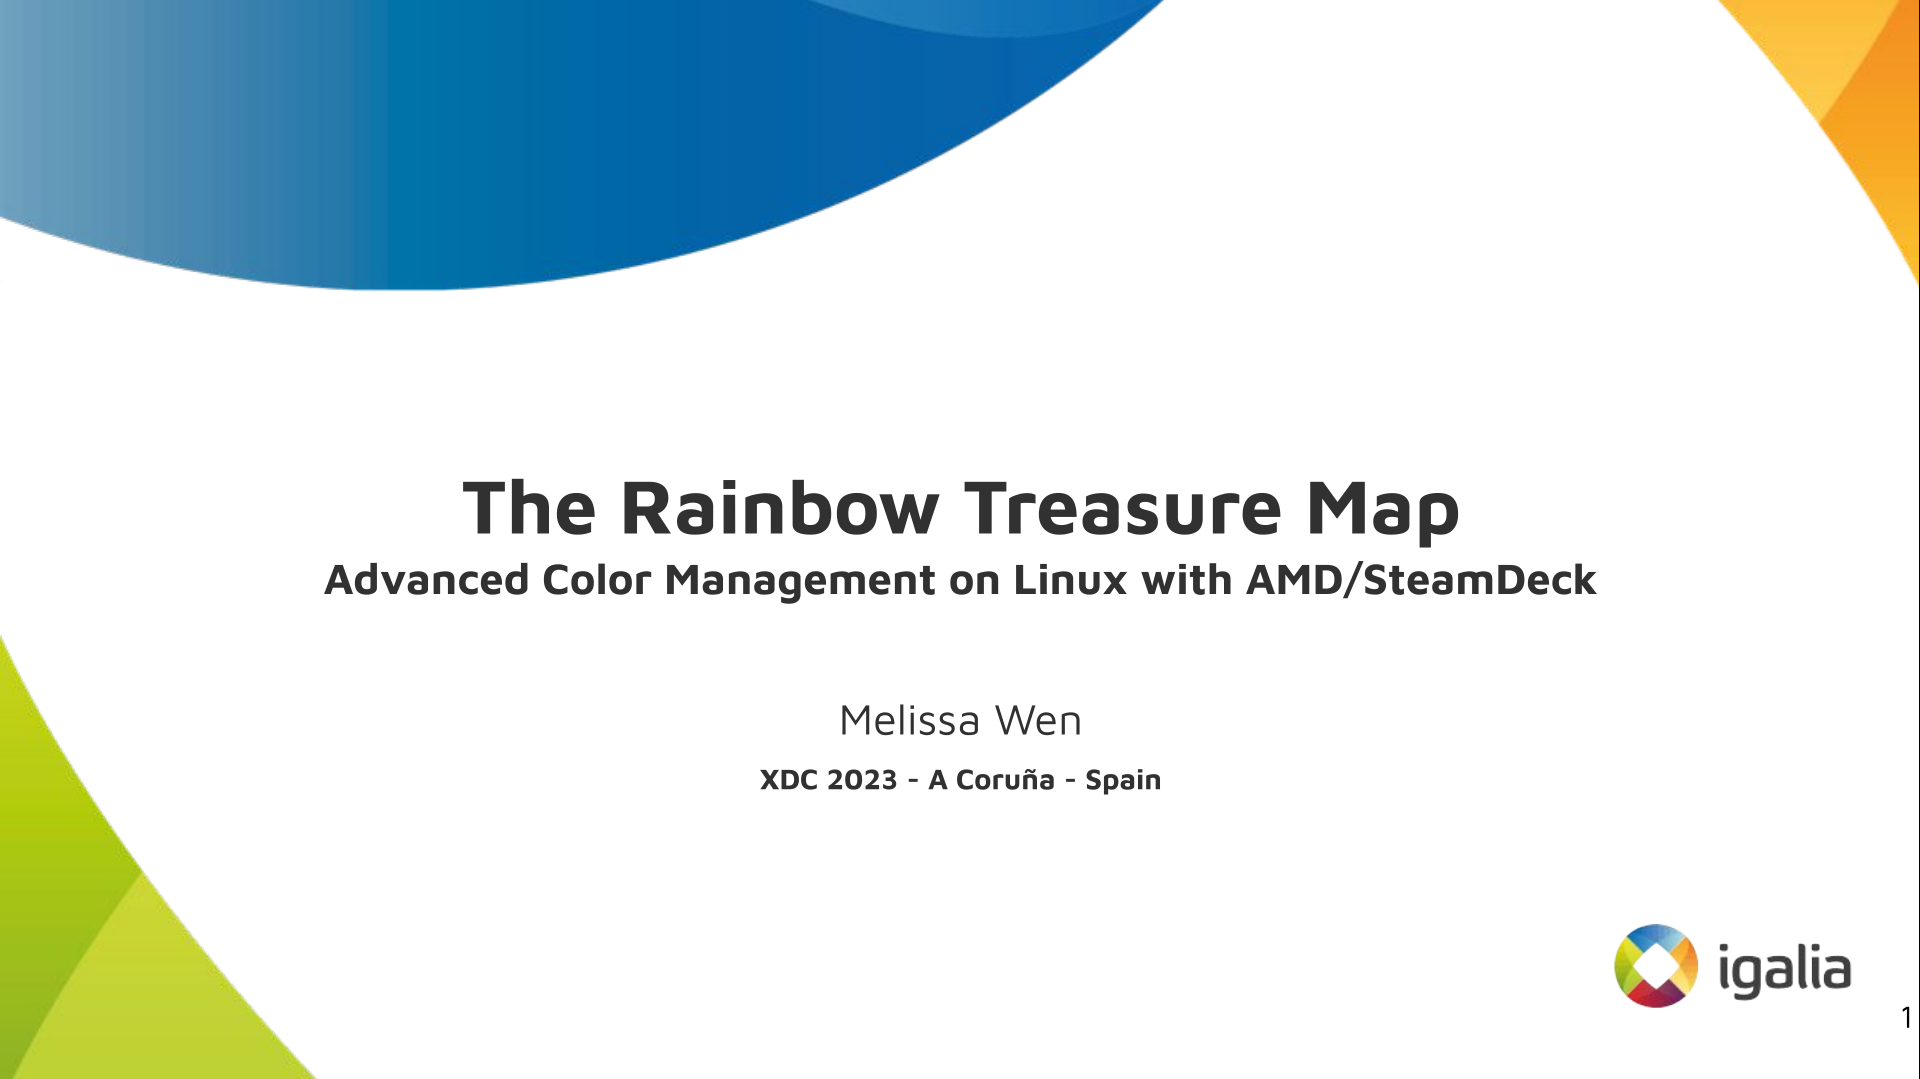 Slide 1: The Rainbow Treasure Map - Advanced Color Management on Linux with AMD/SteamDeck